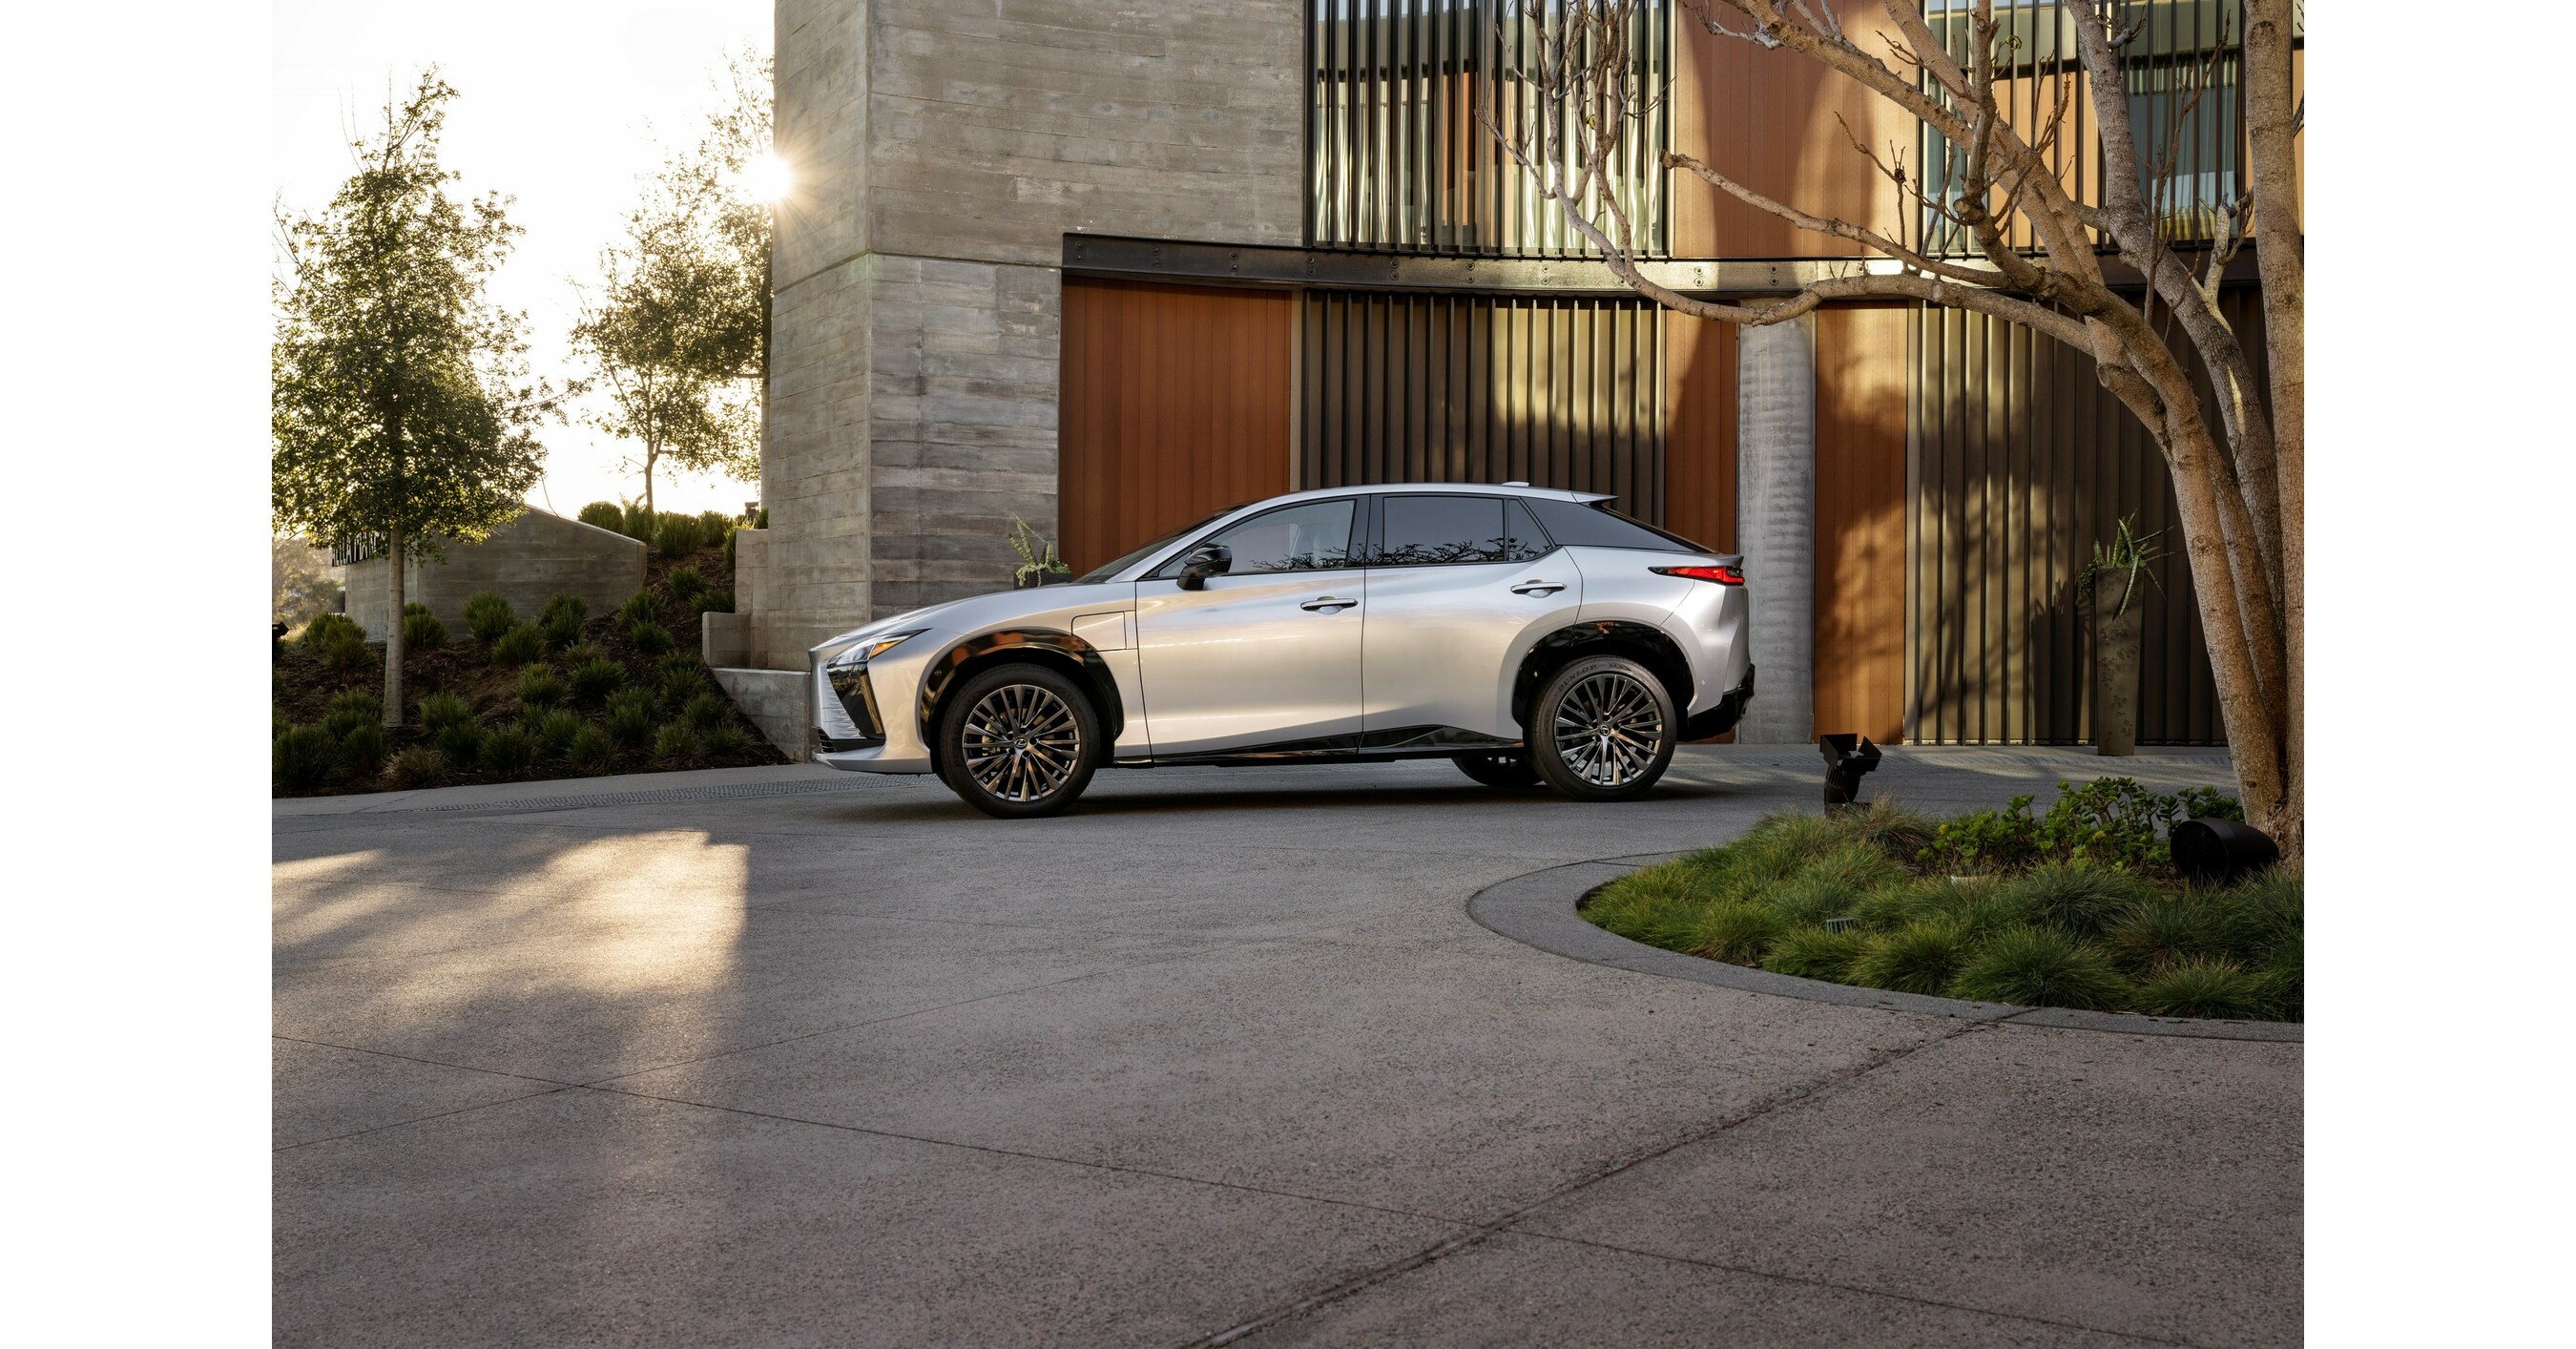 THE NEXT CHAPTER OF ELECTRIFIED: THE ALL-NEW 2023 LEXUS RZ 450e